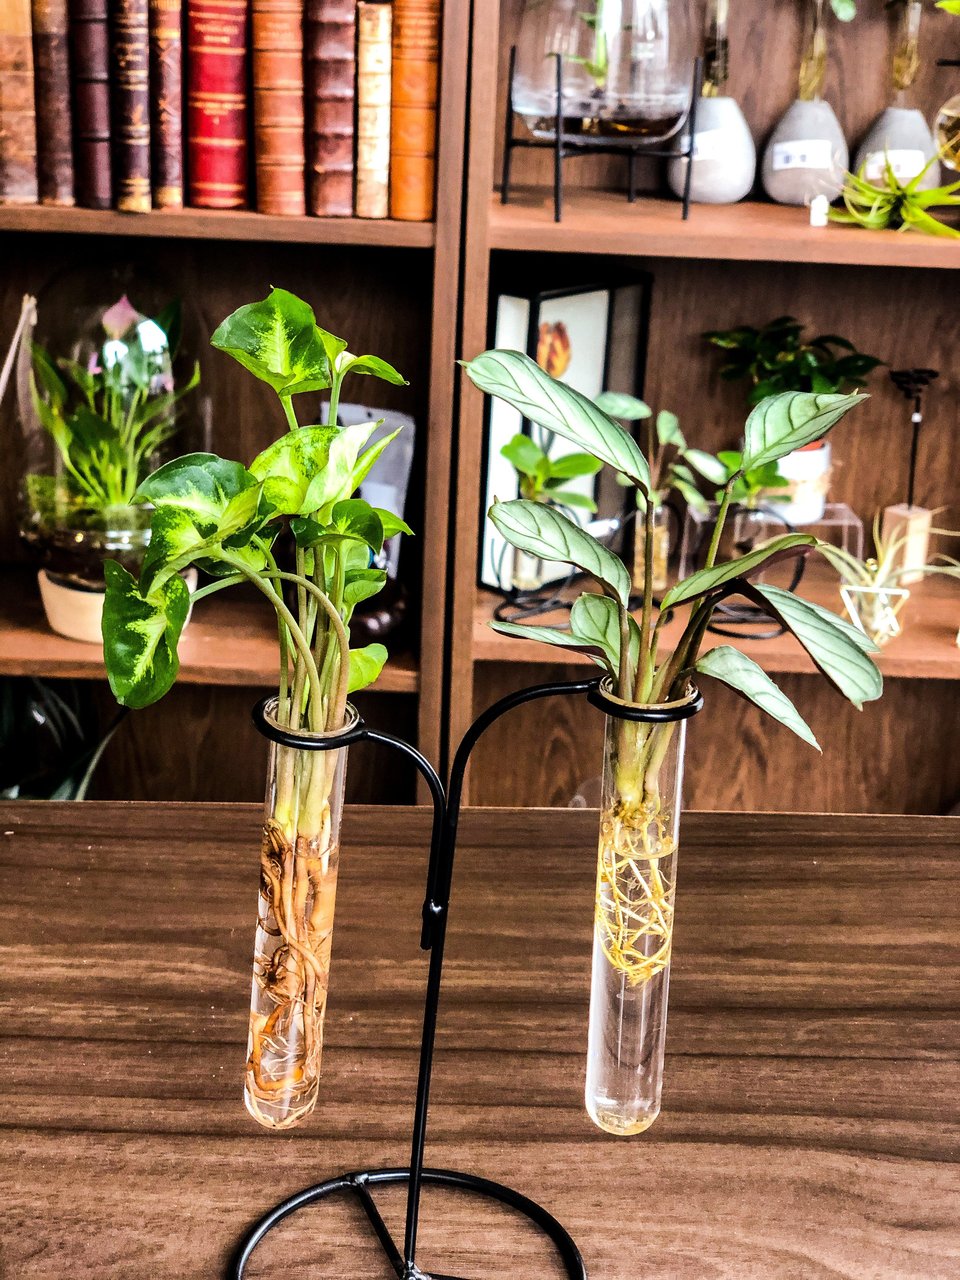 Hydroponic plants in twin tubes